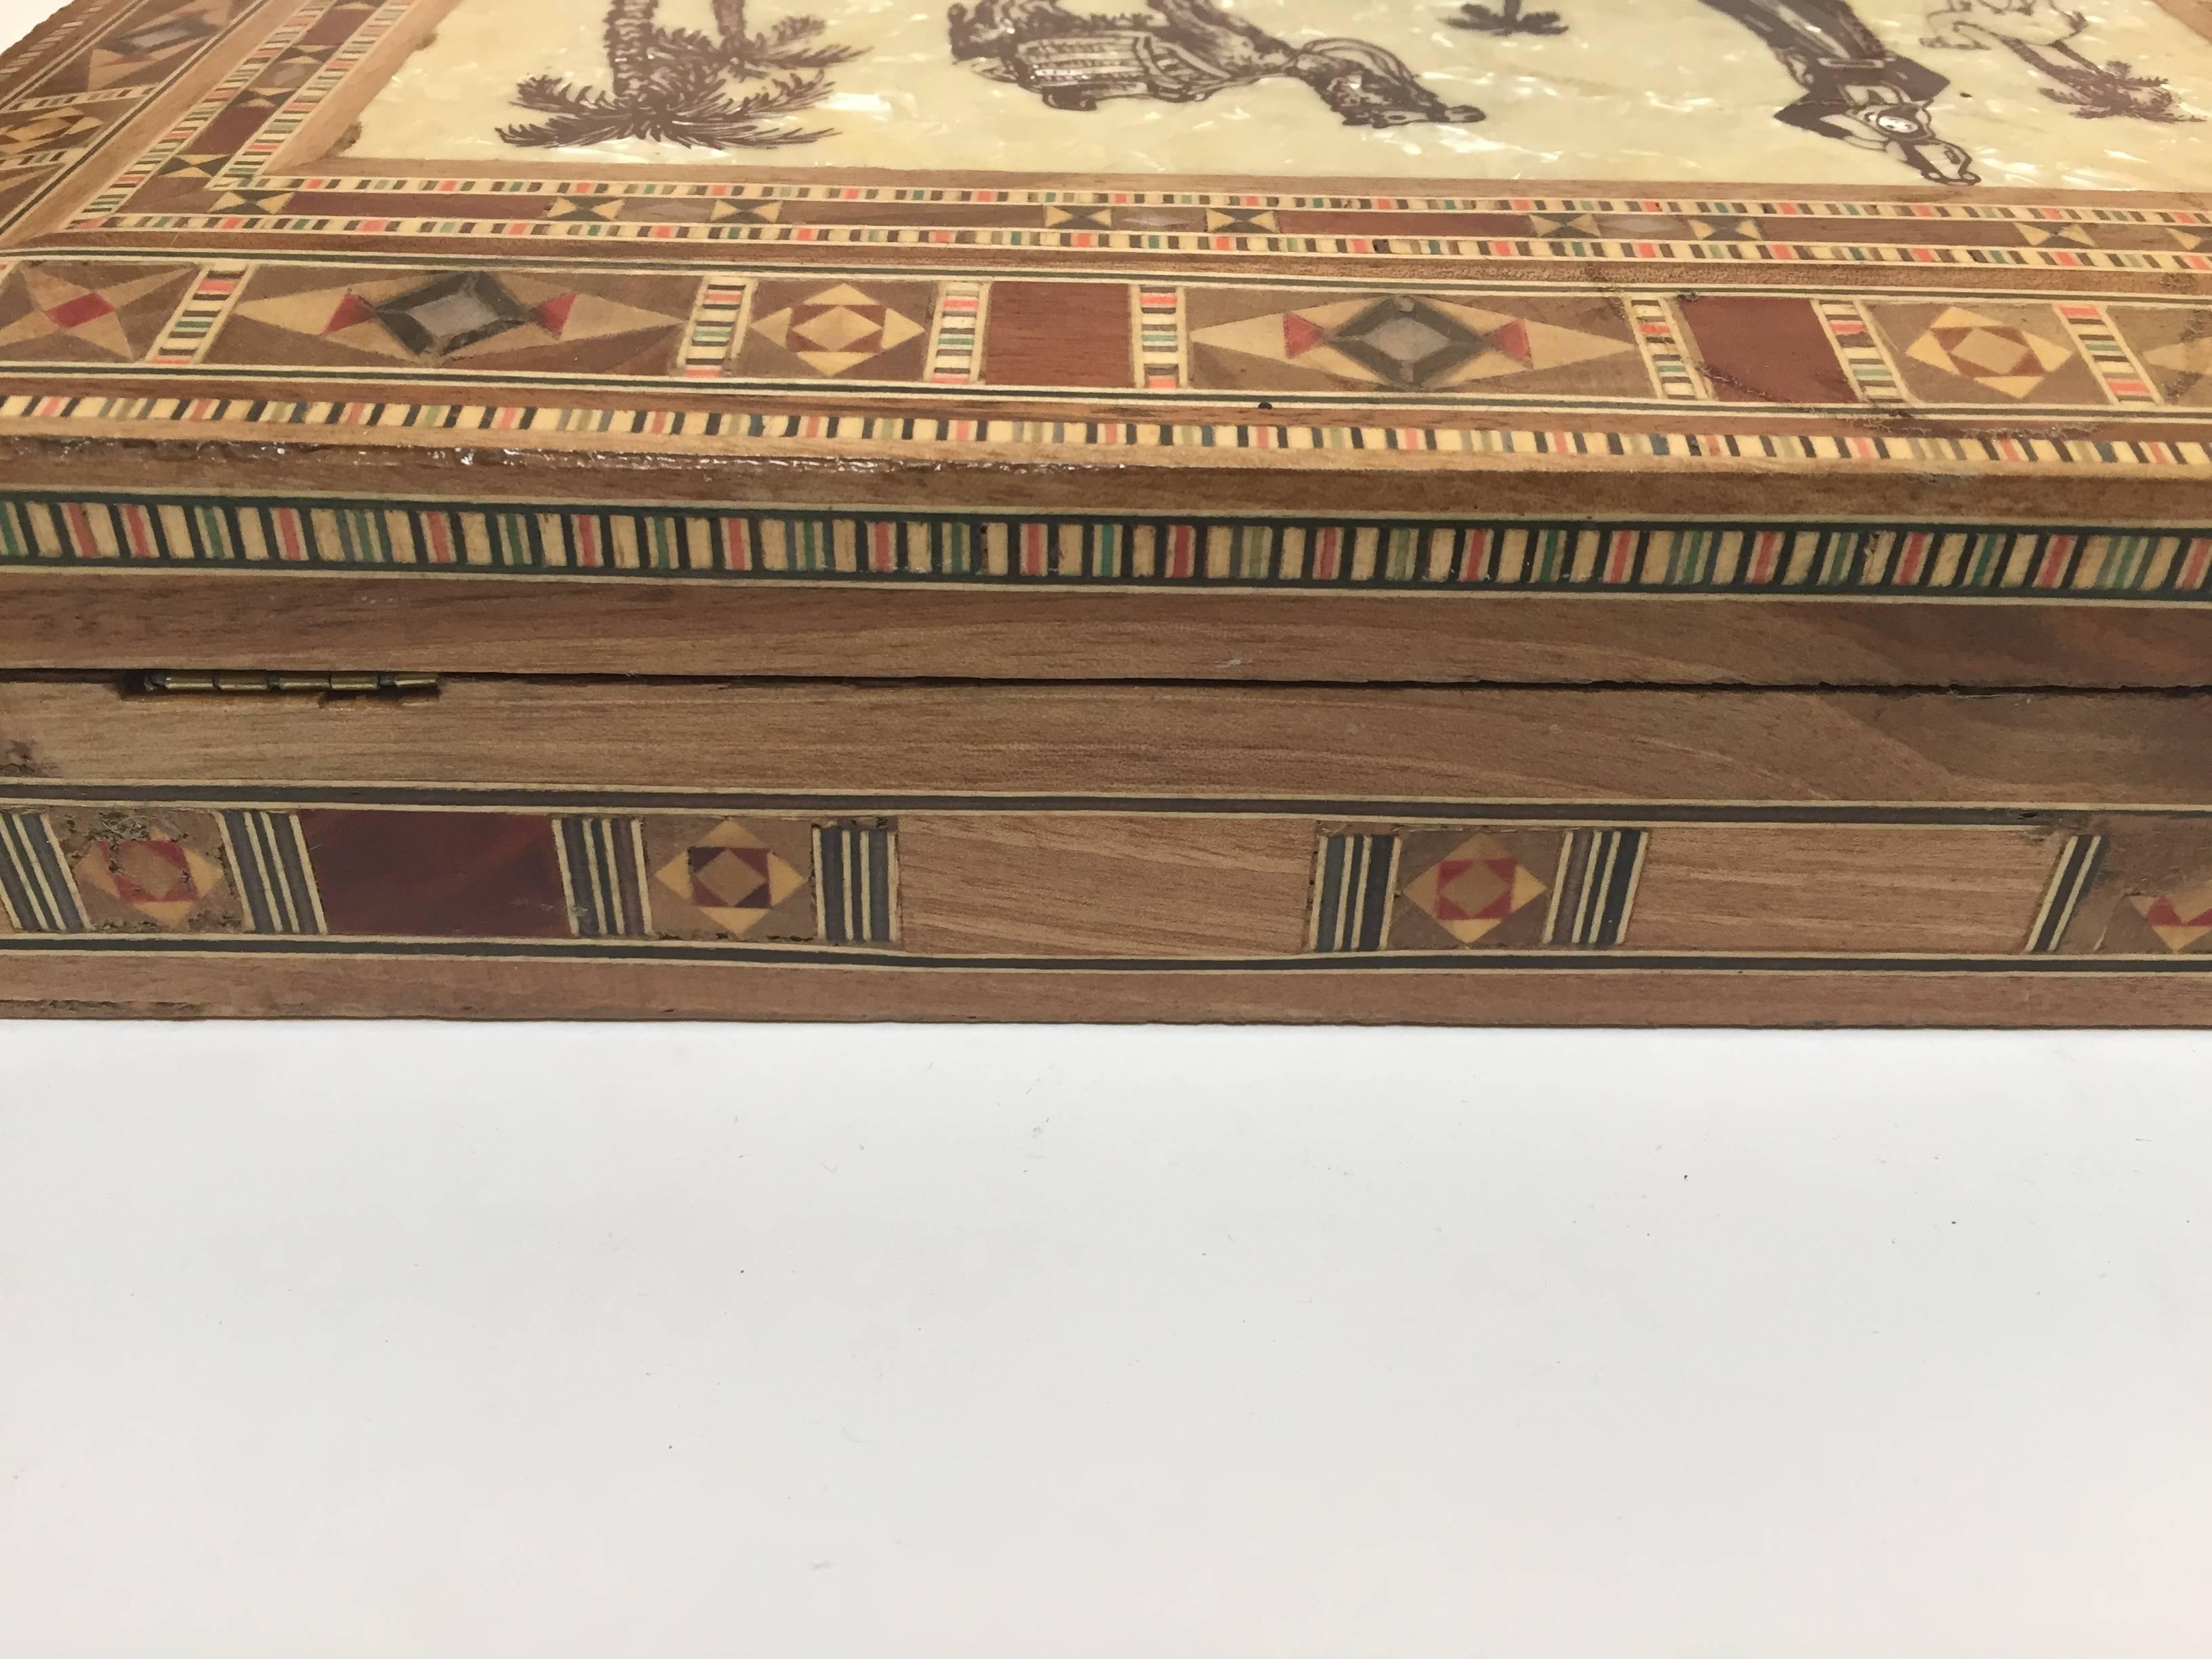 Fruitwood Middle Eastern Syrian Decorative Box